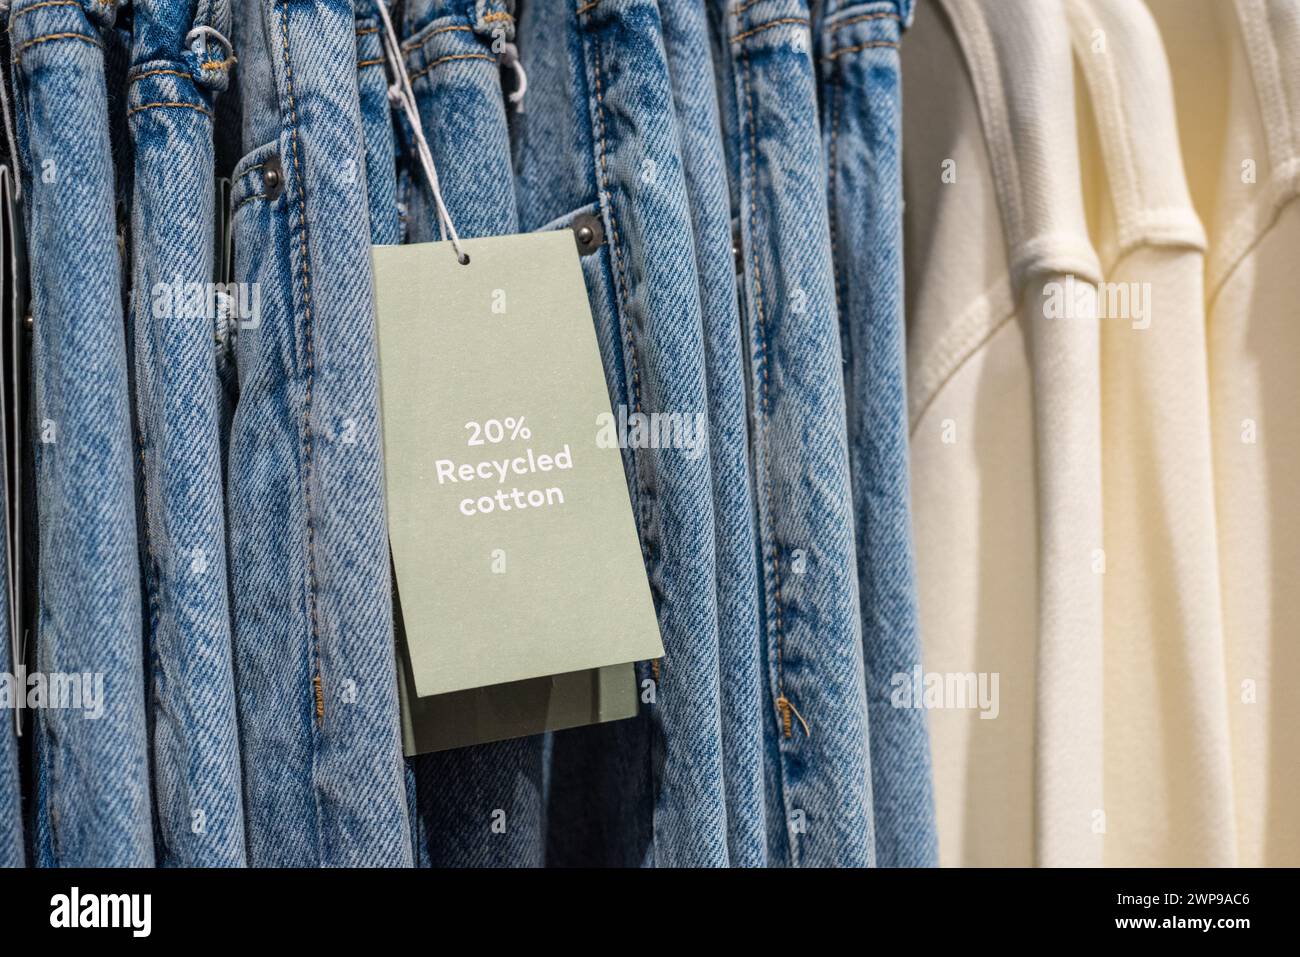 Eco-friendly jeans with an information tag saying that the jeans are made with 20% recycled cotton. Stock Photo